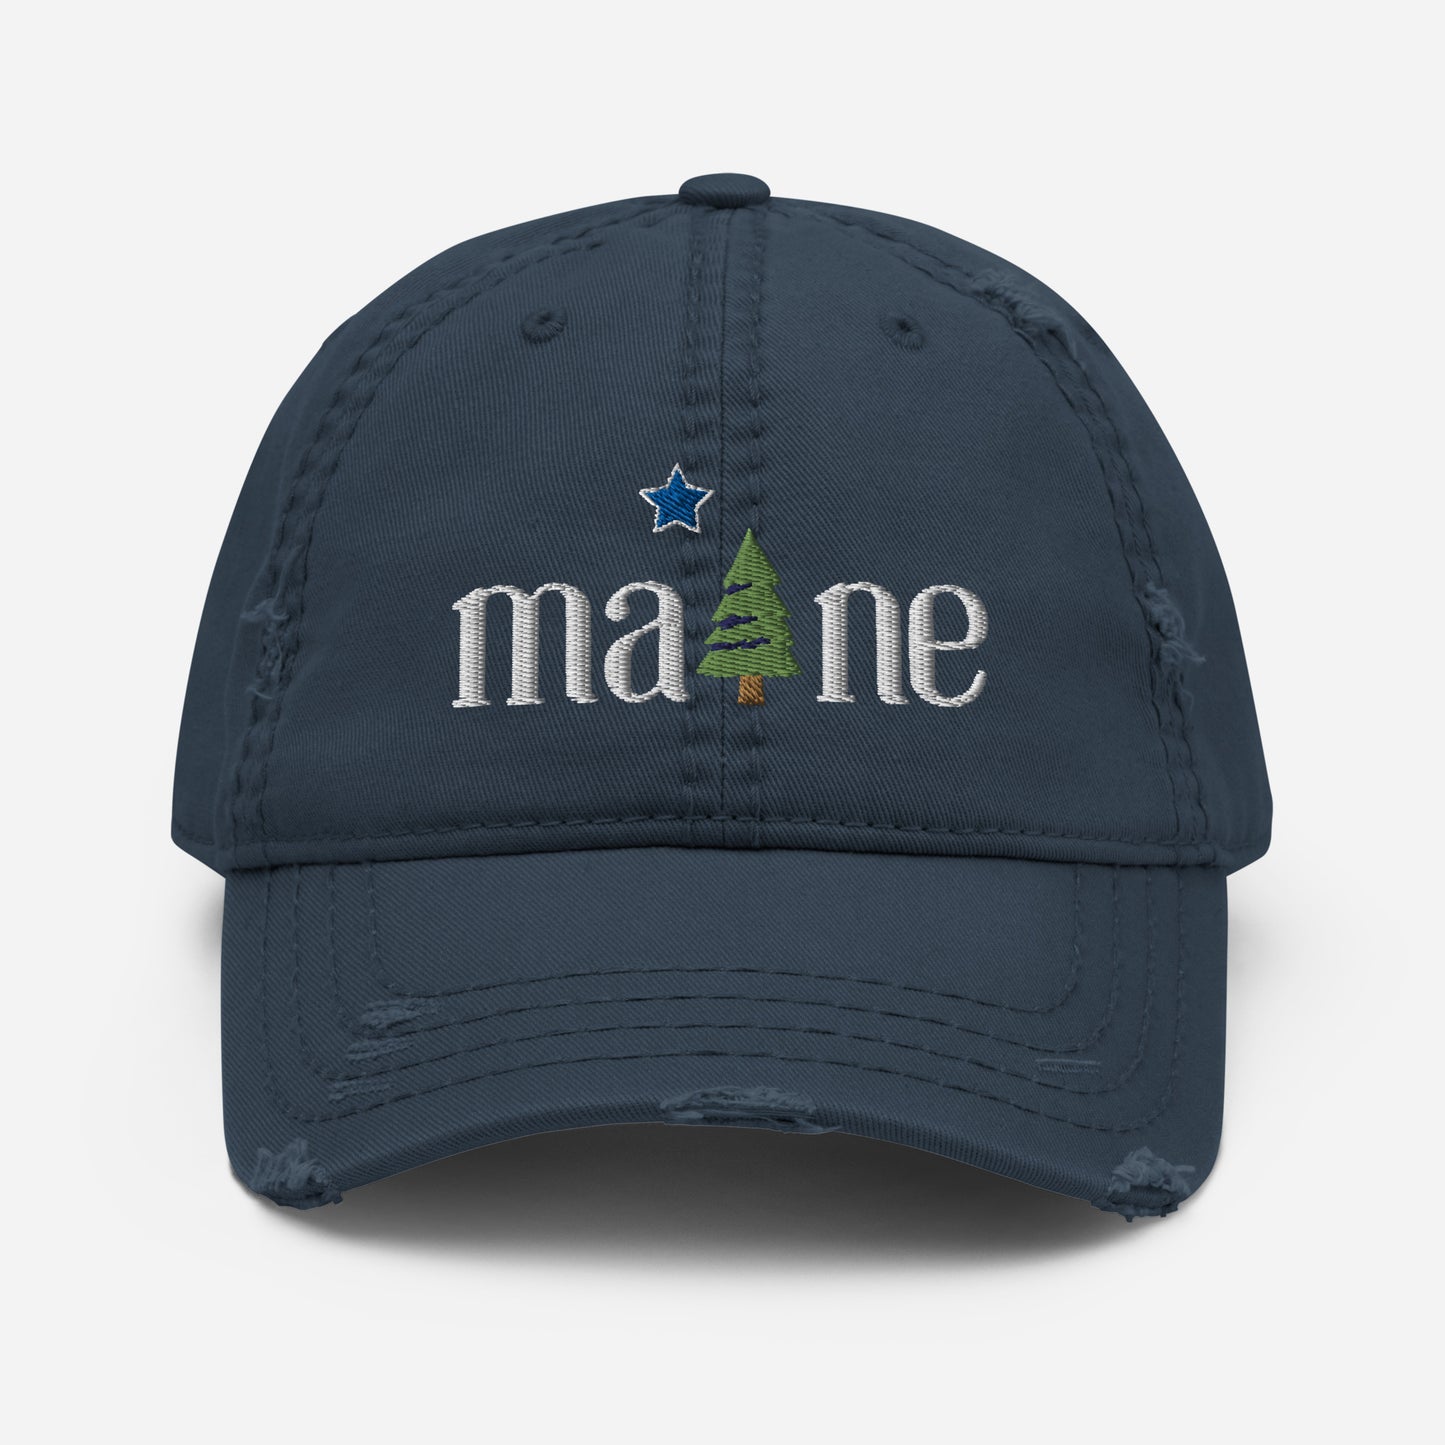 Distressed 1901 Maine Dad Hat with Pine Tree and North Star